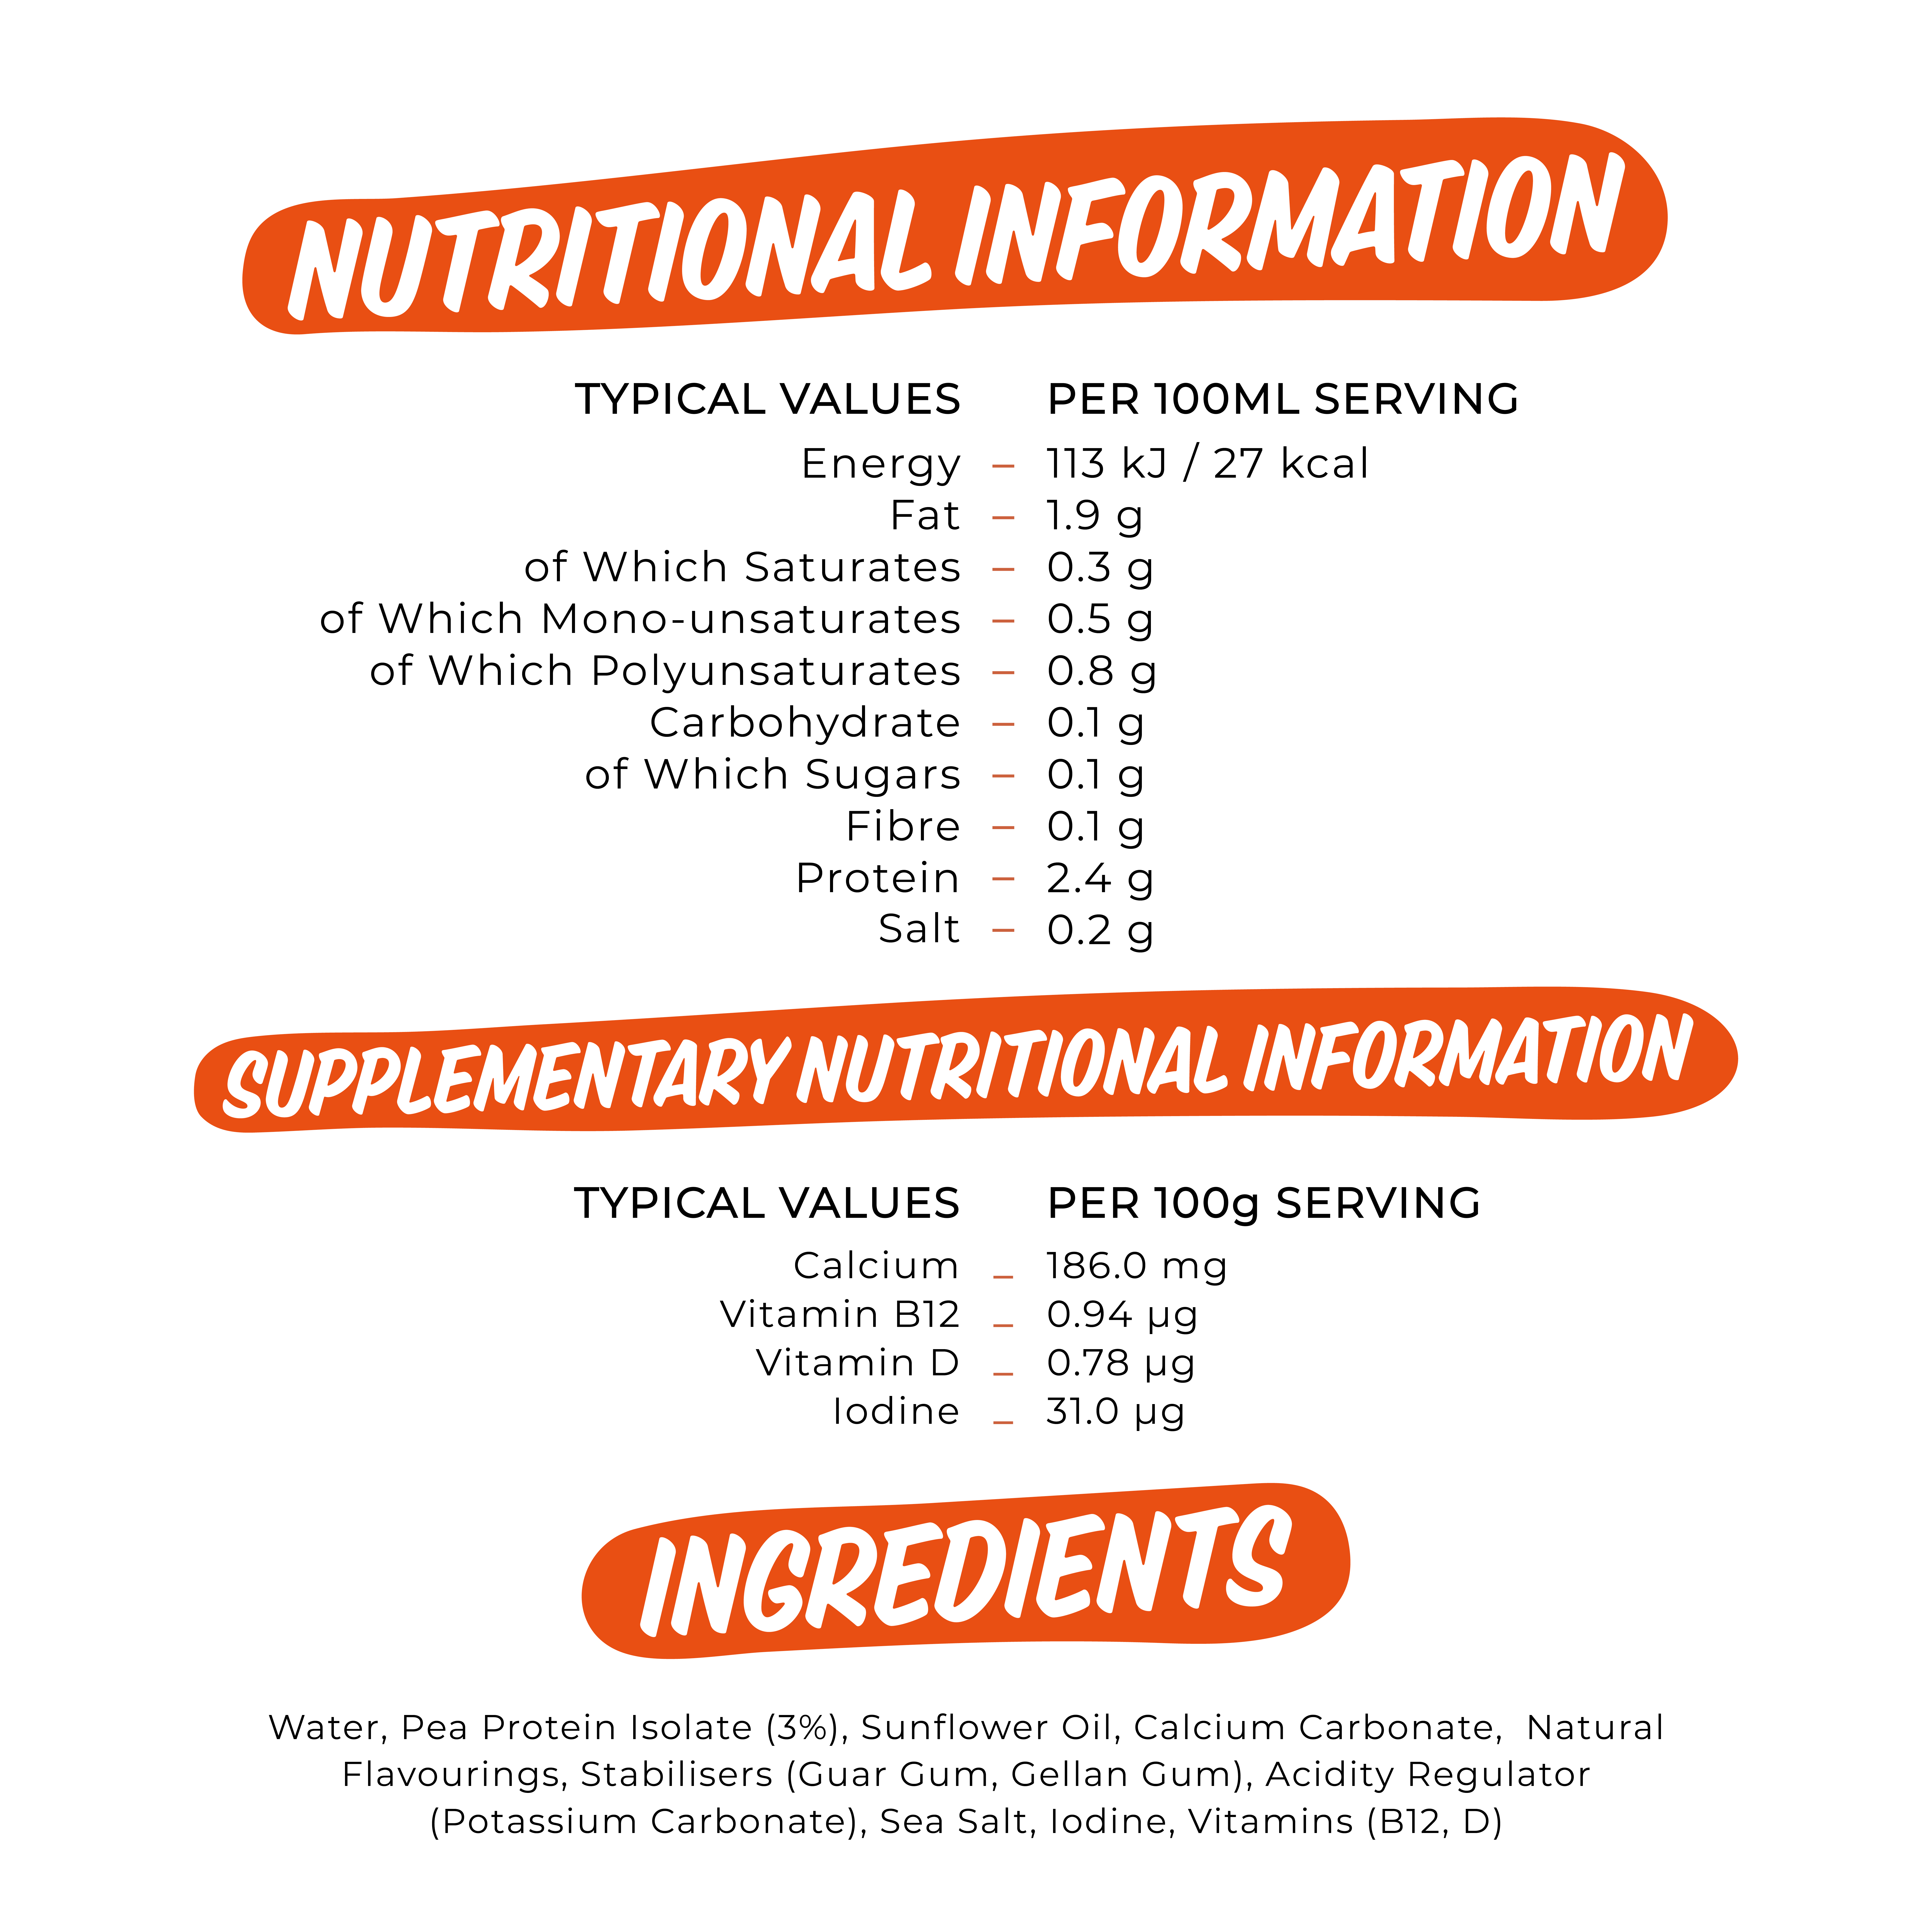  TYPICAL VALUES PER 100ML SERVING Energy 113 kJ / 27 kcal Fat 1.9 g of Which Saturates 0.3 g of Which Mono-unsaturates 0.5 g of Which Polyunsaturates 0.8 g Carbohydrate 0.1 g of Which Sugars 0.1 g Fibre 0.1 g Protein 2.4 g Salt 0.2 g 
                                  SUPPLEMENTARY NUTRITIONAL INFORMATION 
                                  TYPICAL VALUES PER 100g SERVING Calcium 186.0 mg Vitamin B12 0.94 pg Vitamin D 0.78 pg Iodine 31.0 pg 

                                  Water, Pea Protein Isolate (3%), Sunflower Oil, Calcium Carbonate, Natural Flavourings, Stabilisers (Guar Gum, Gellan Gum), Acidity Regulator (Potassium Carbonate), Sea Salt, Iodine, Vitamins (B12, D) 
                                  